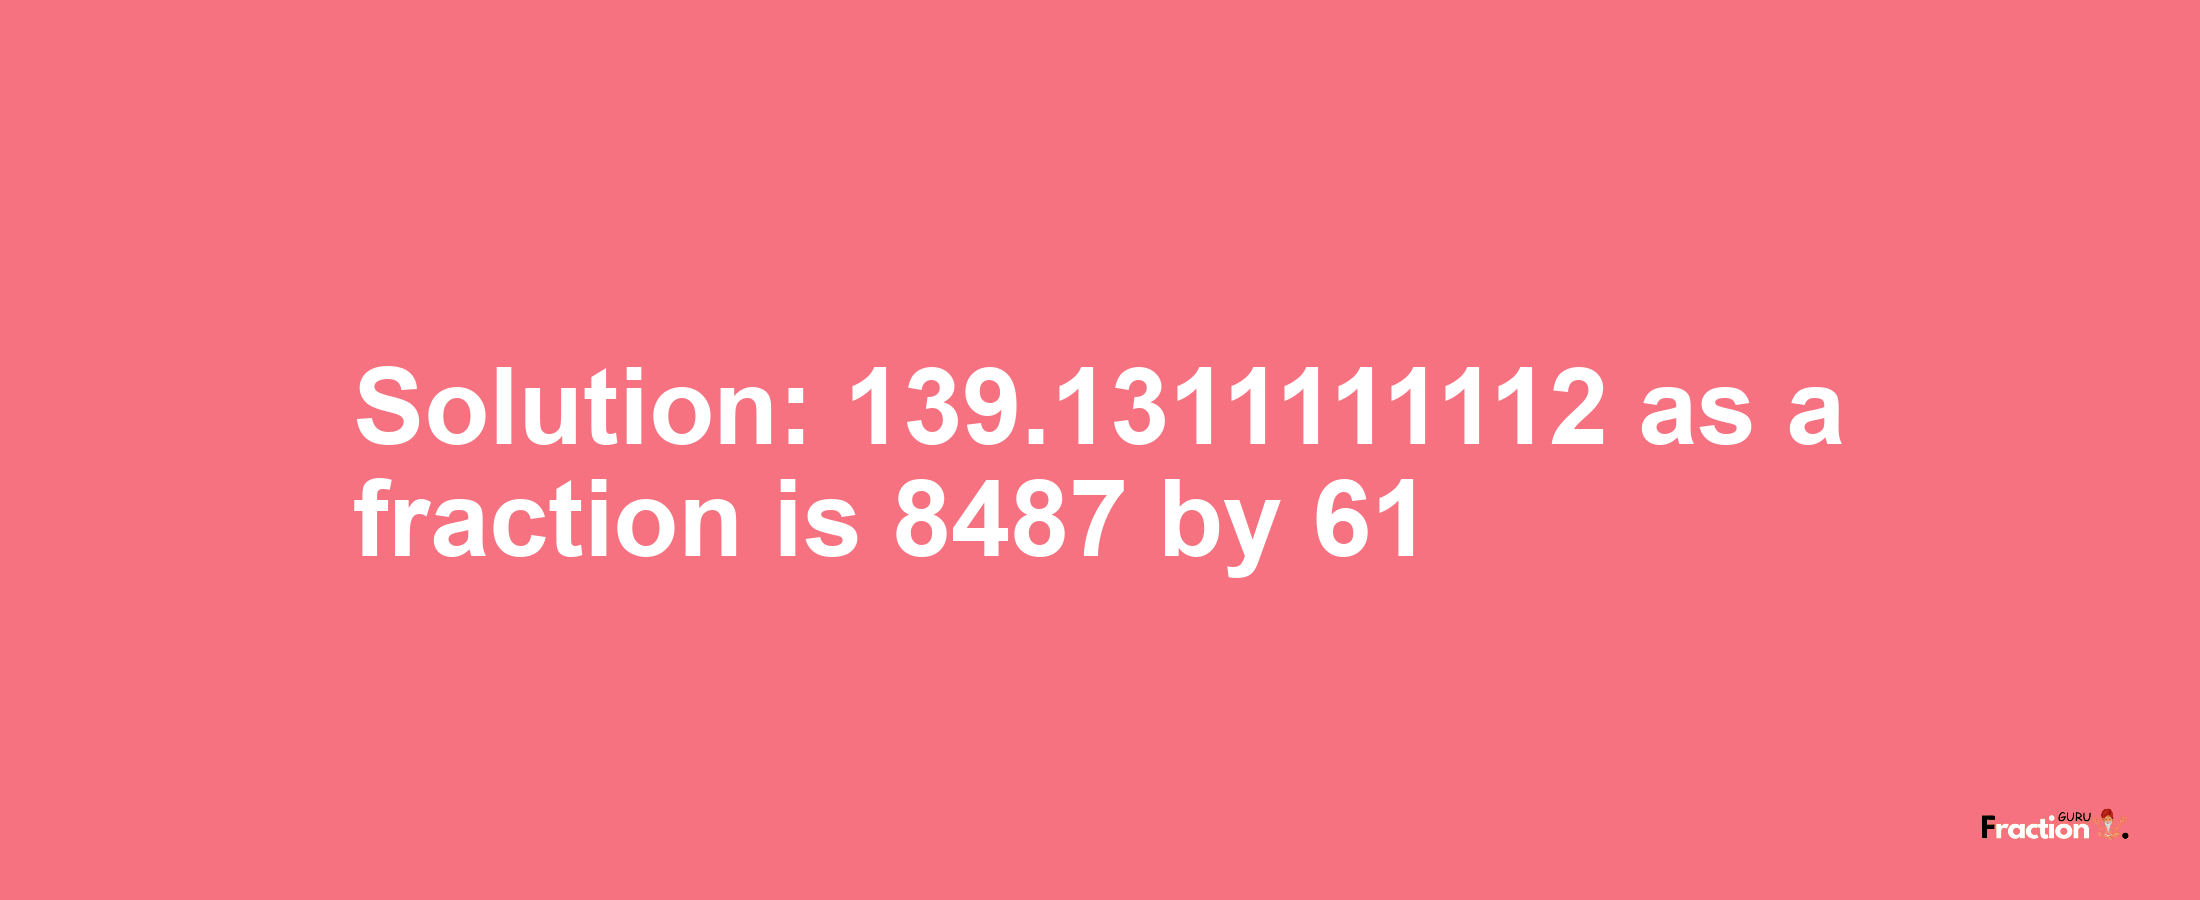 Solution:139.1311111112 as a fraction is 8487/61